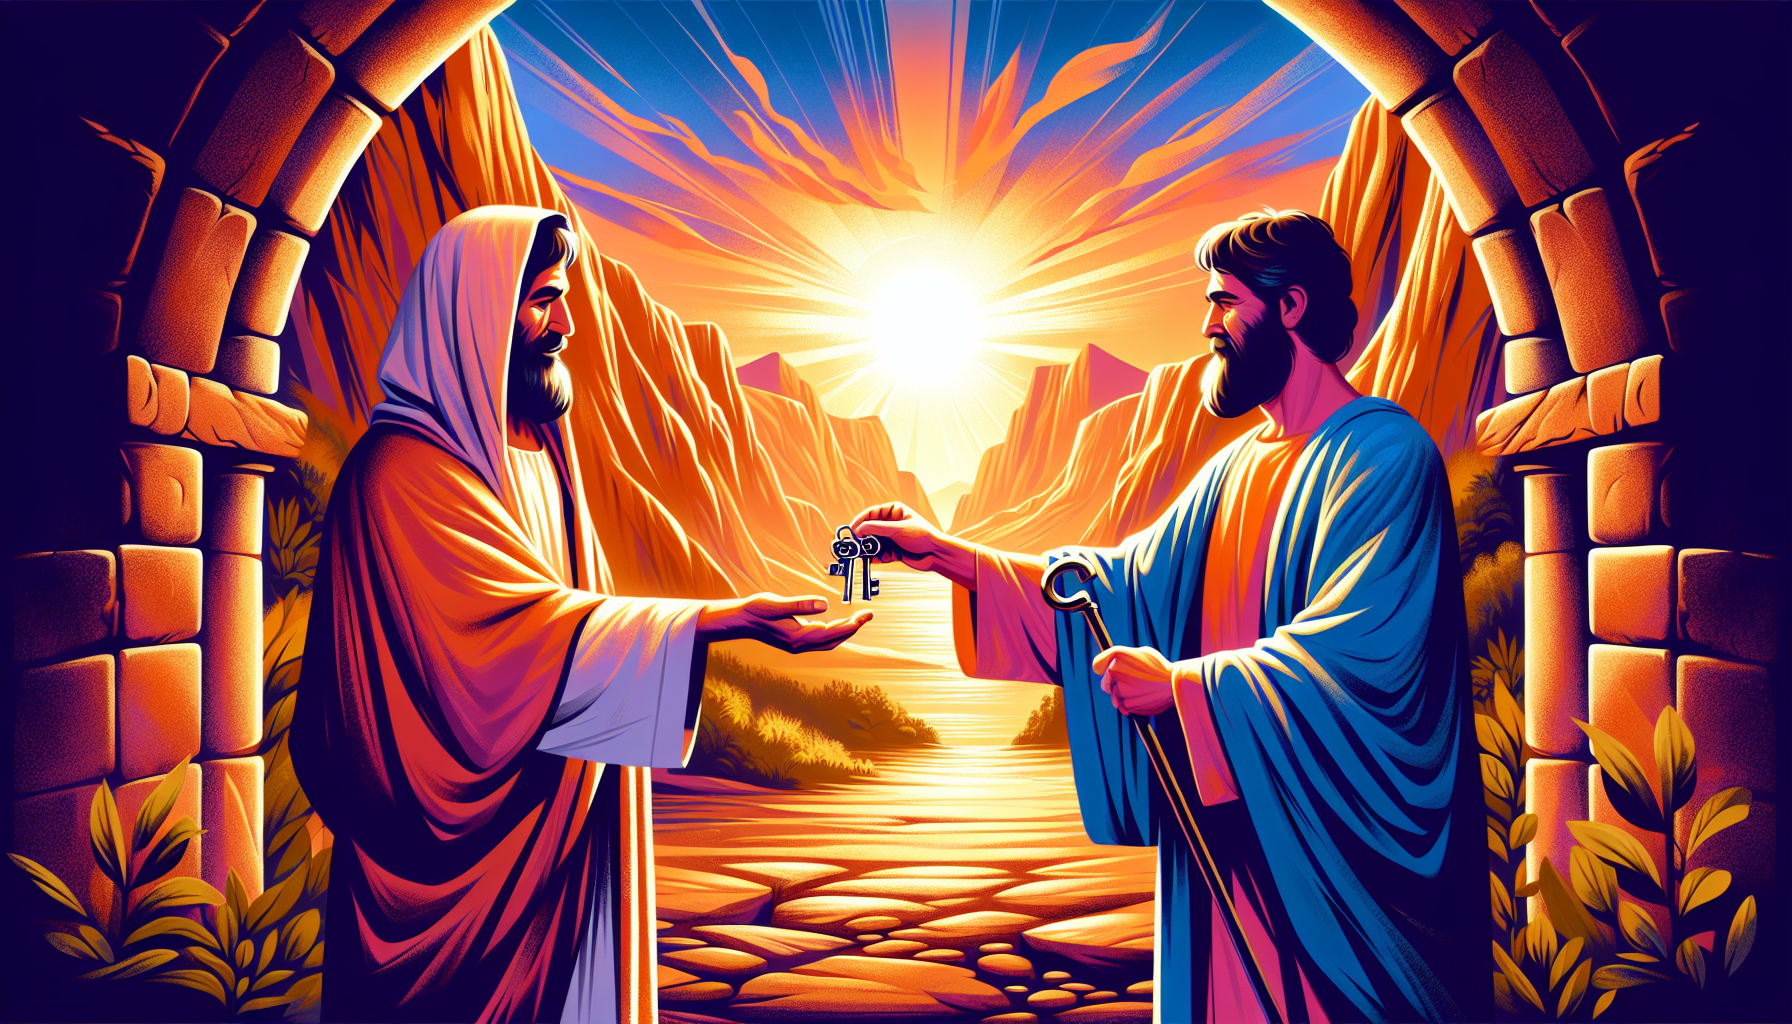 Artistic portrayal of Jesus entrusting Peter with the keys to the Church, set in an ancient, serene landscape under a radiant sunset.